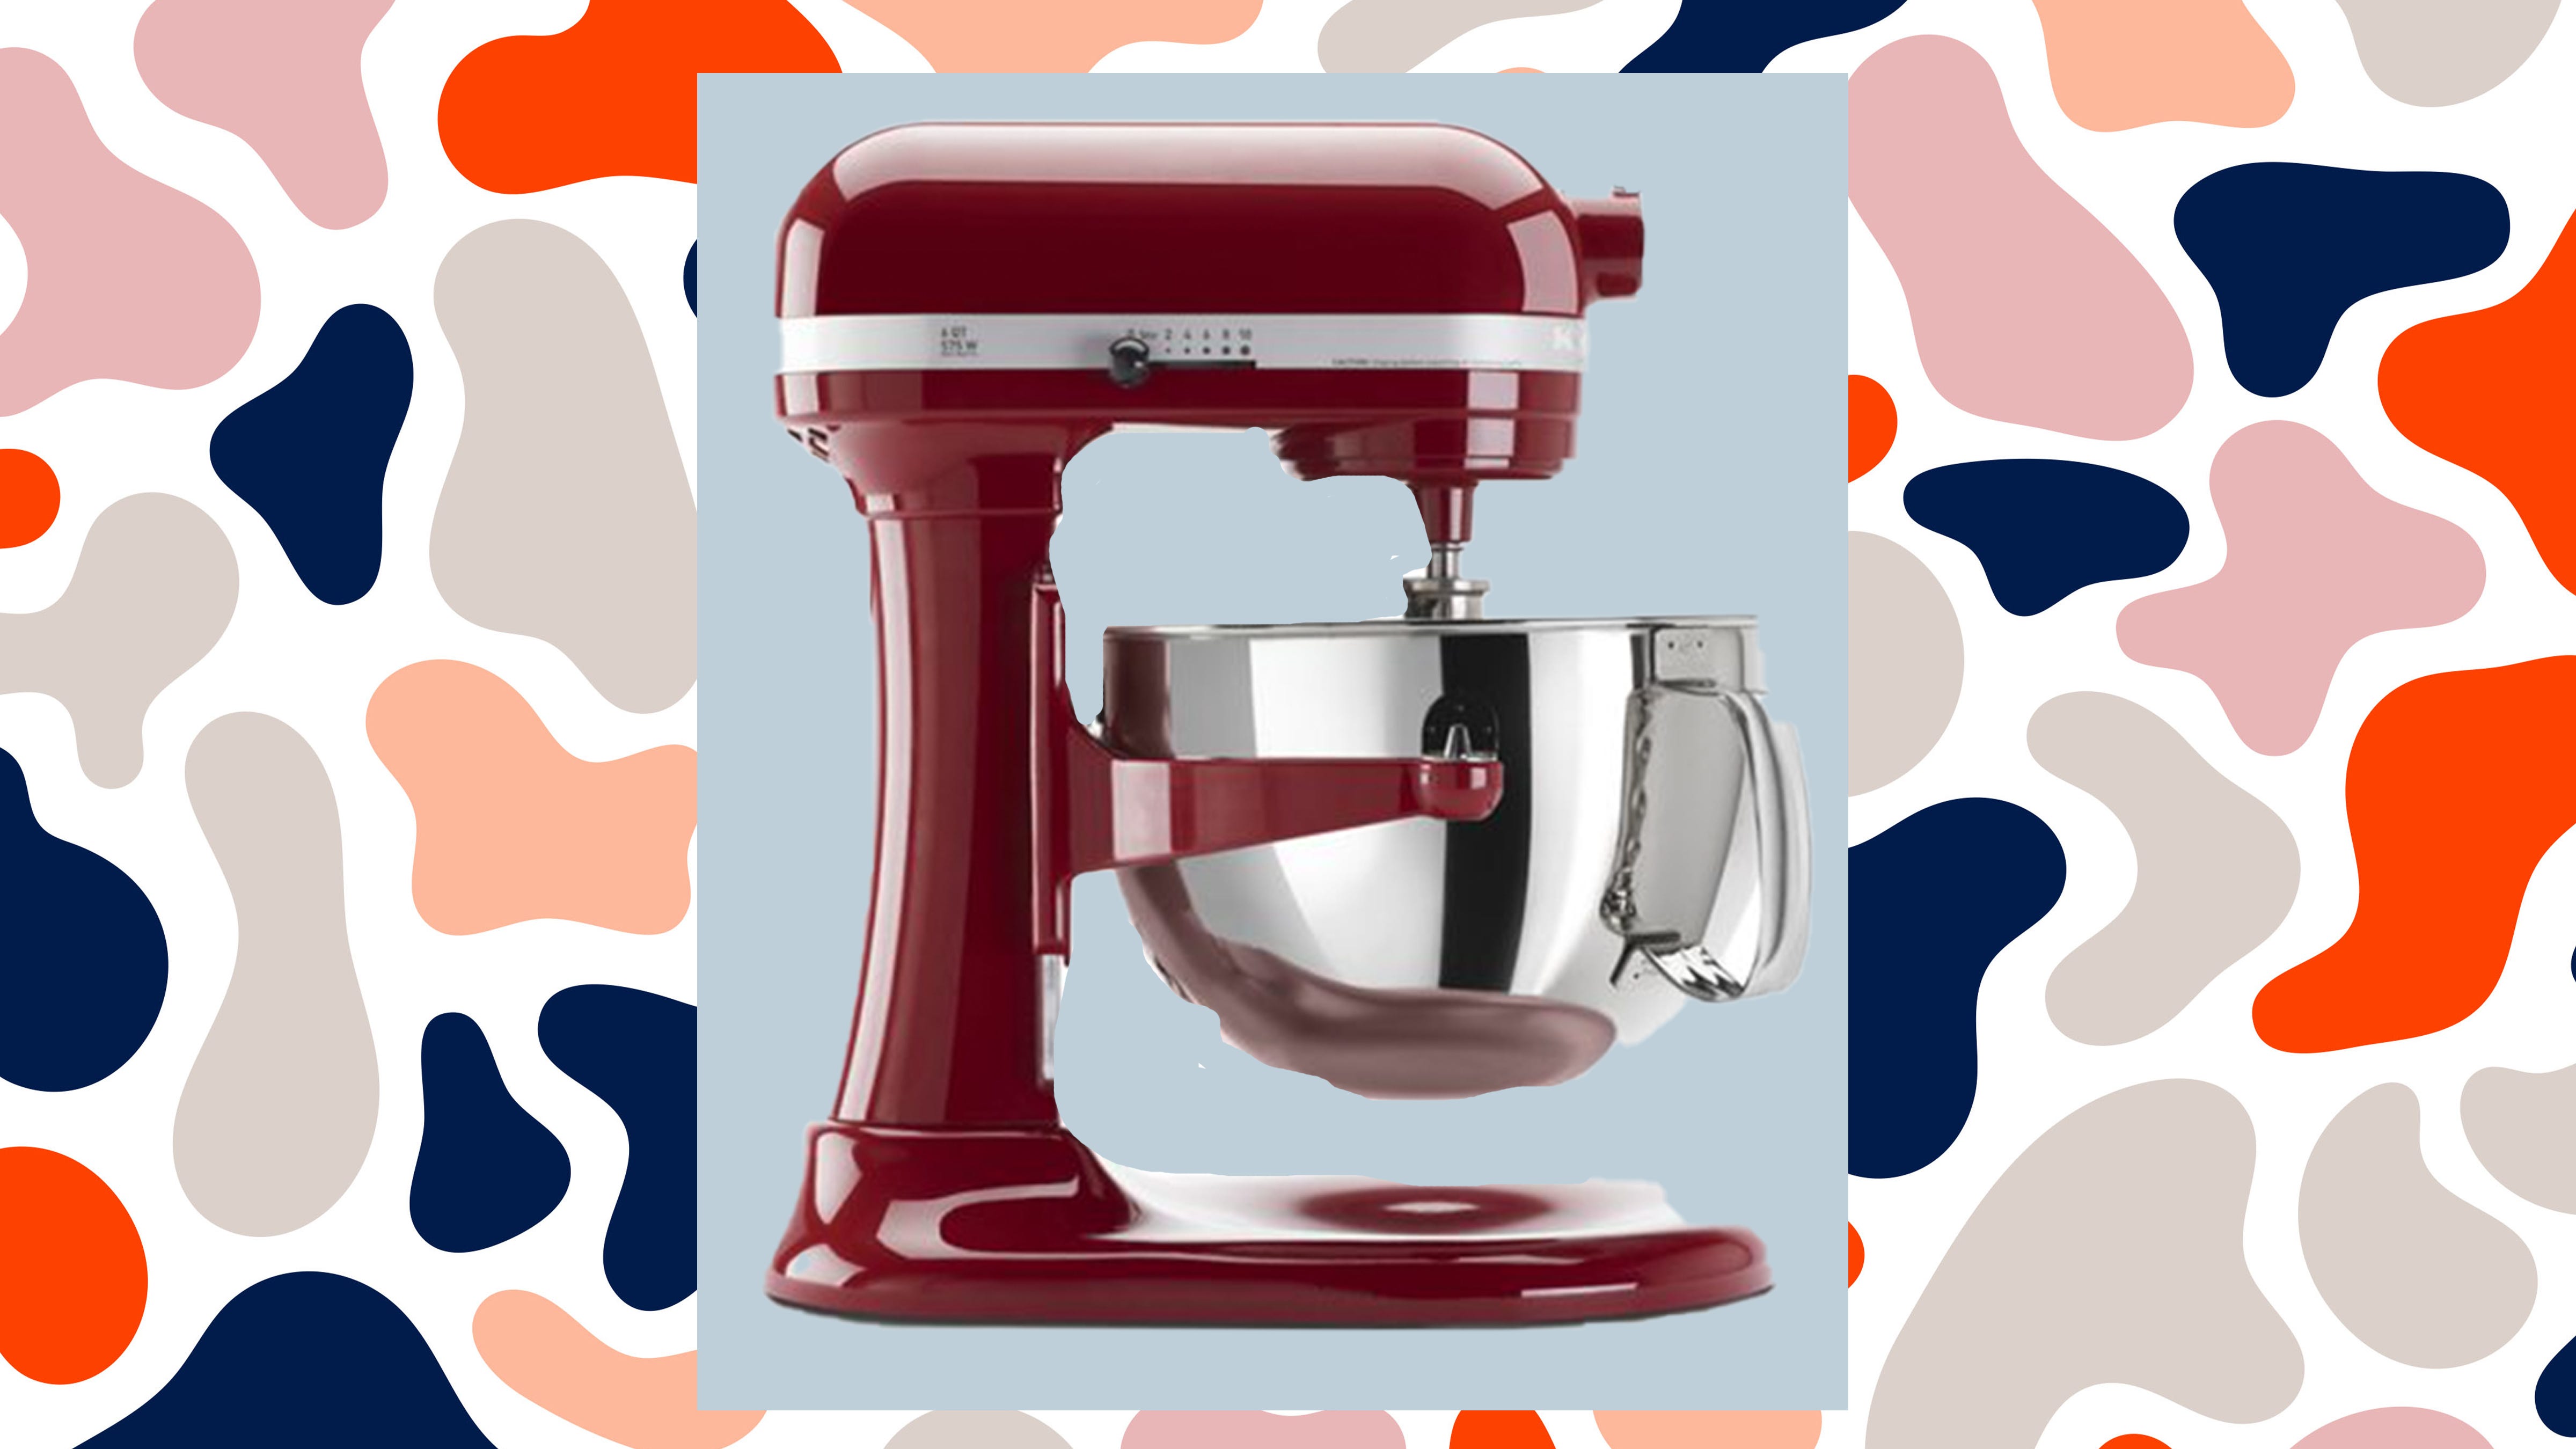 KitchenAid stand mixer: on refurbished model with this